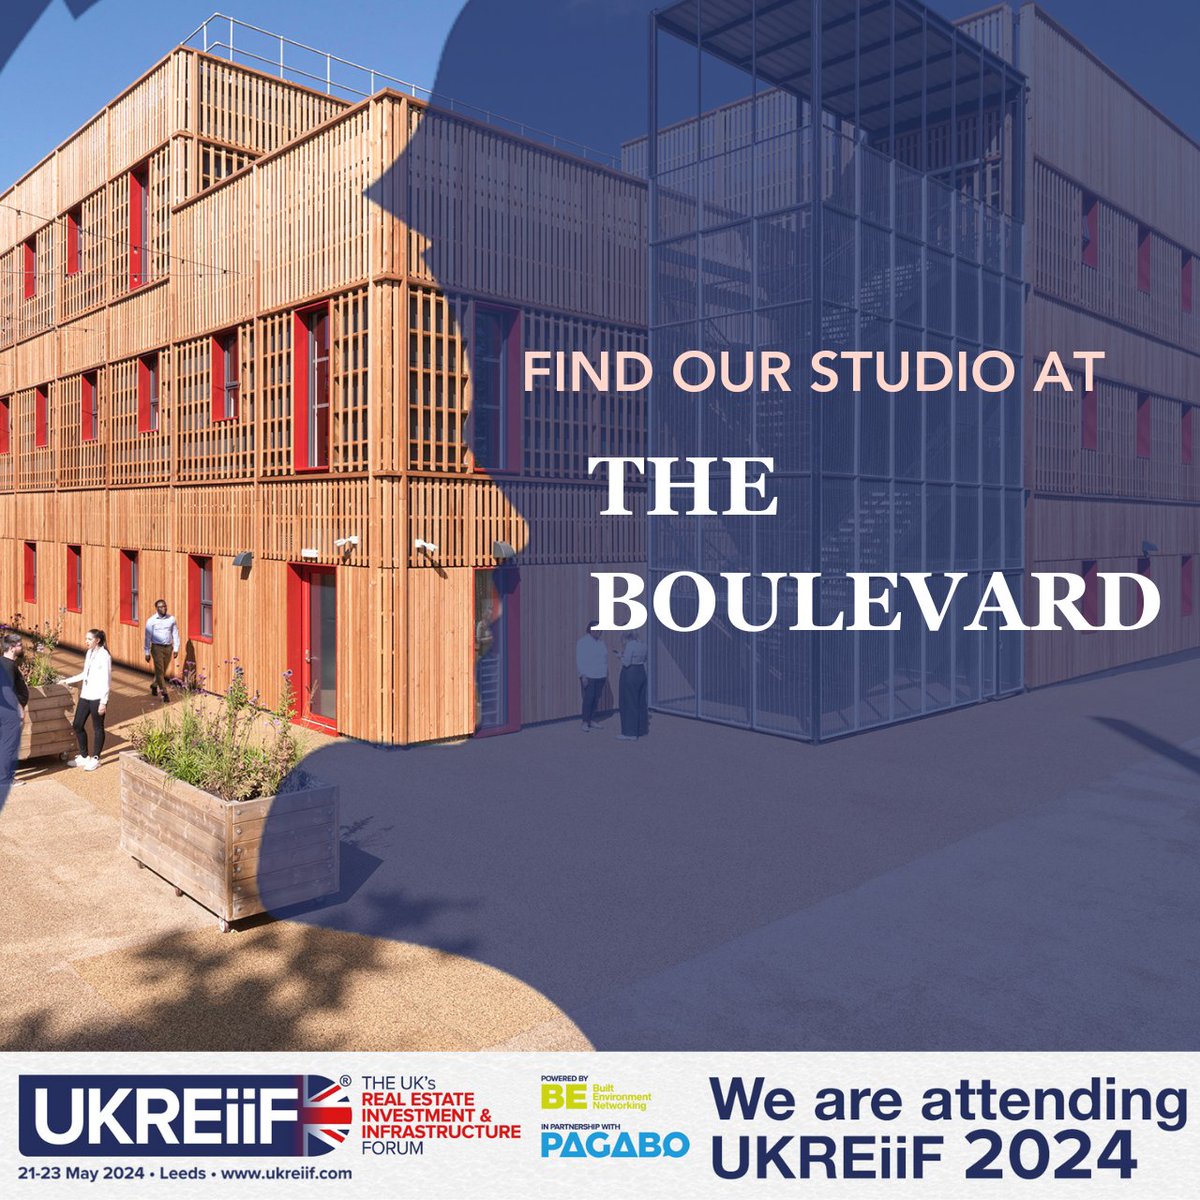 British Land is a partner of @UKREiiF 2024!

With only two weeks to go, you can find the team across the three days participating in a variety of panels and events, plus we have a packed agenda in our British Land Studio at The Boulevard.